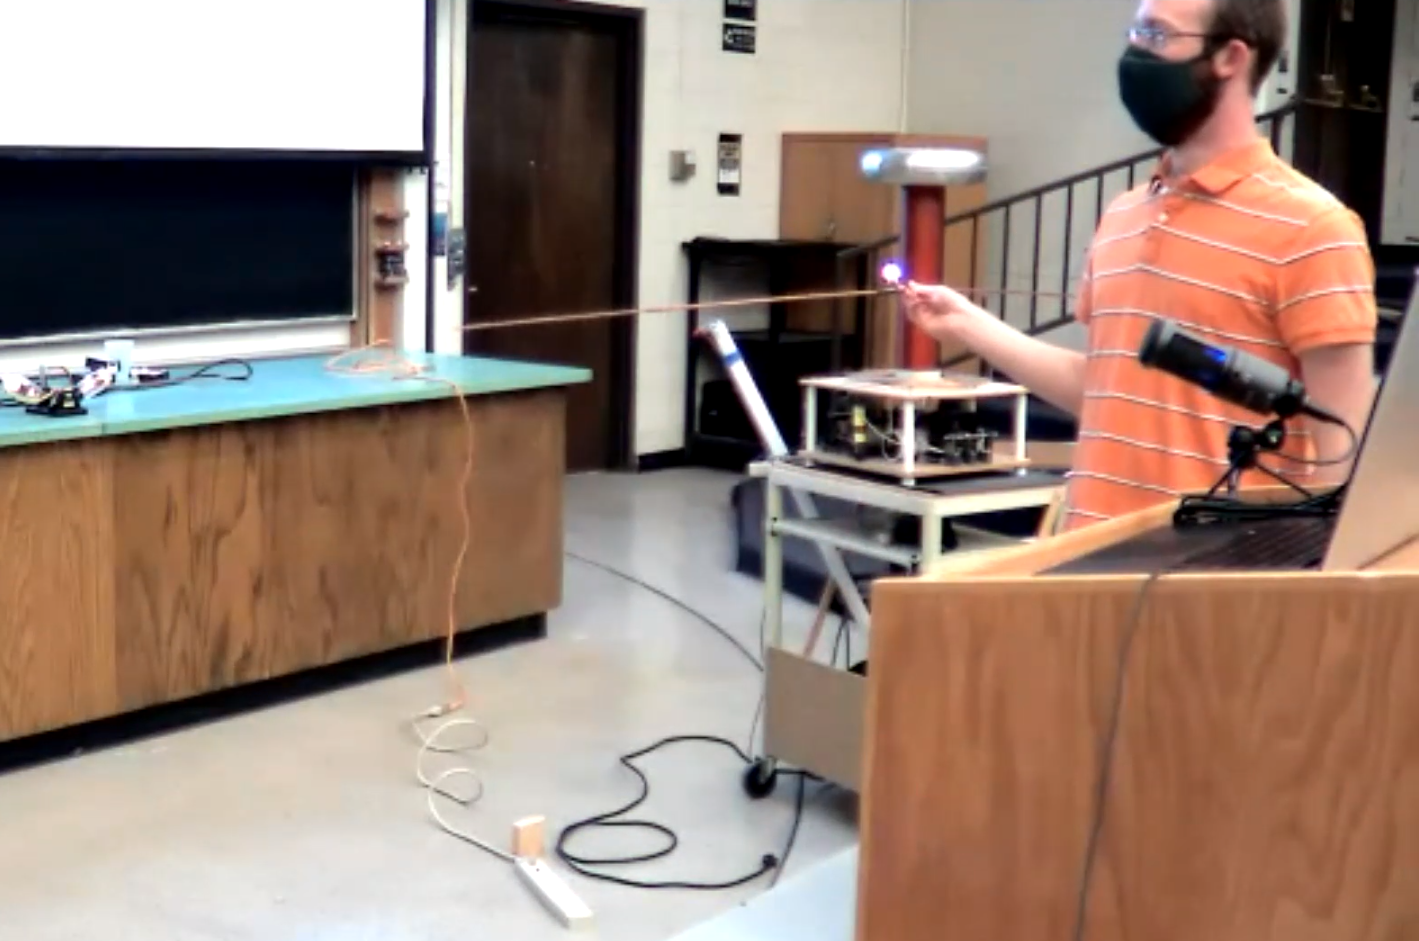 Hybrid class during the pandemic with an interactive lecture demo on radio waves for PHYS 1230: Light and Color.